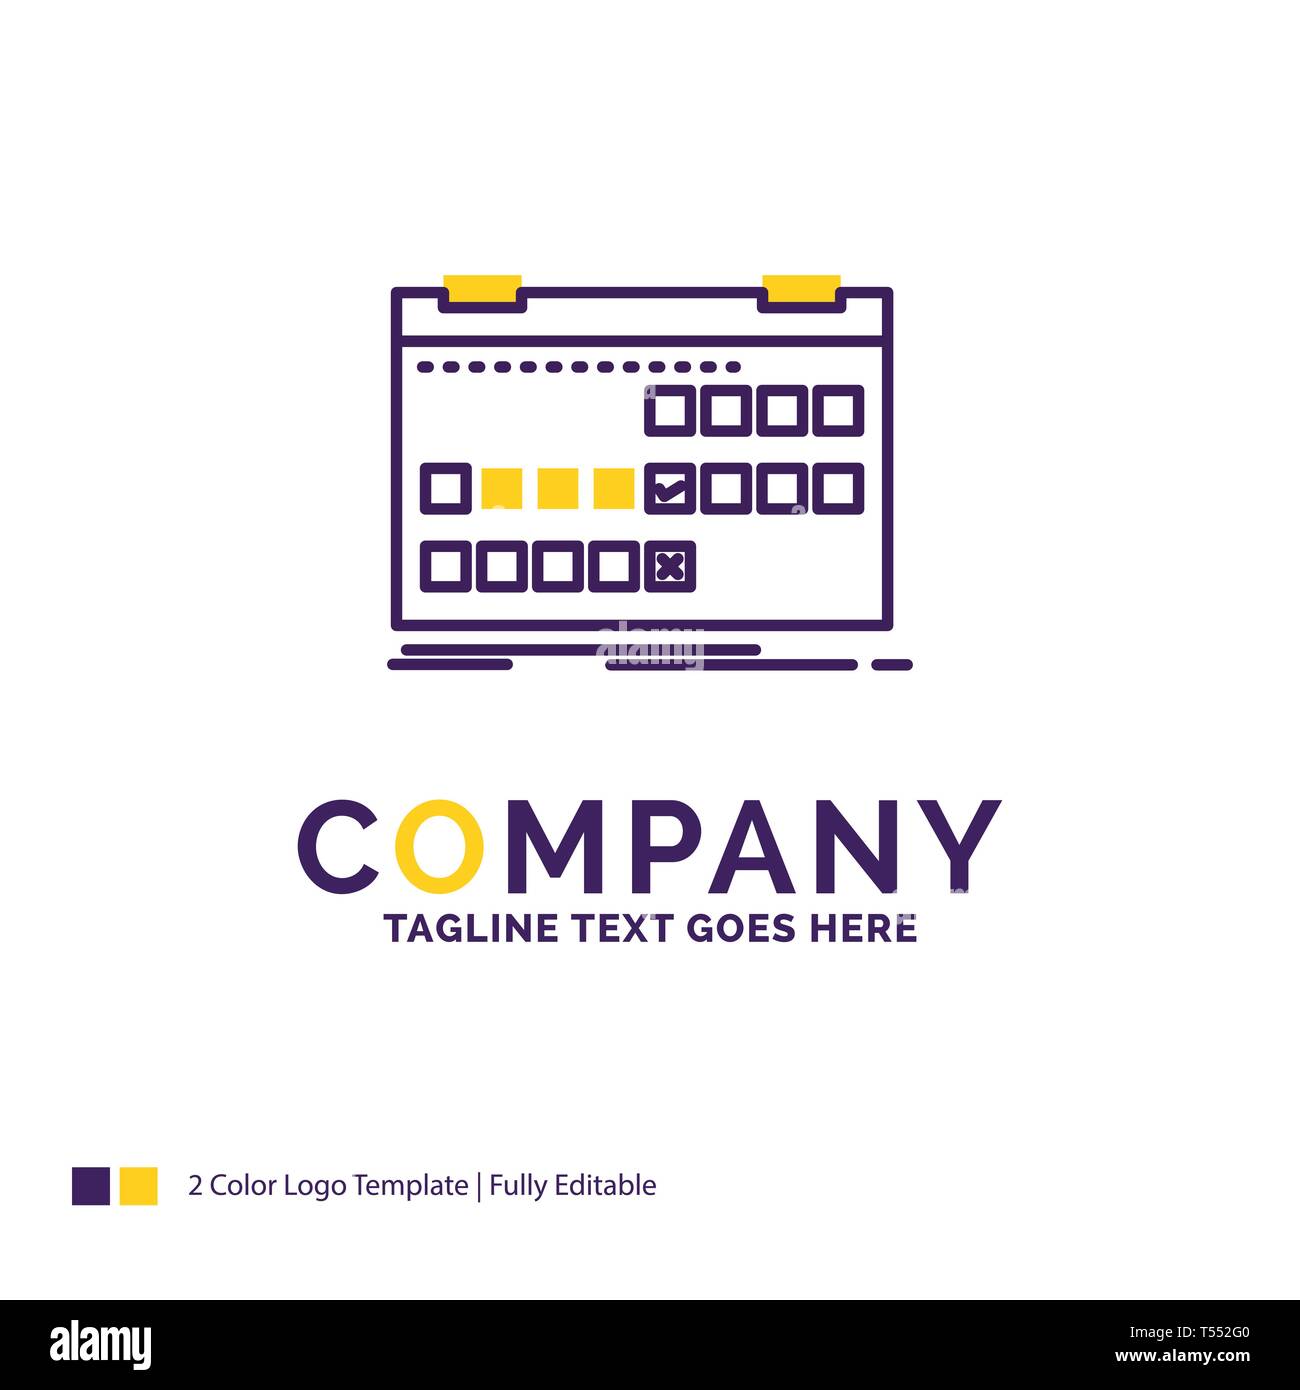 Company Name Logo Design For Calendar, date, event, release, schedule. Purple and yellow Brand Name Design with place for Tagline. Creative Logo templ Stock Vector